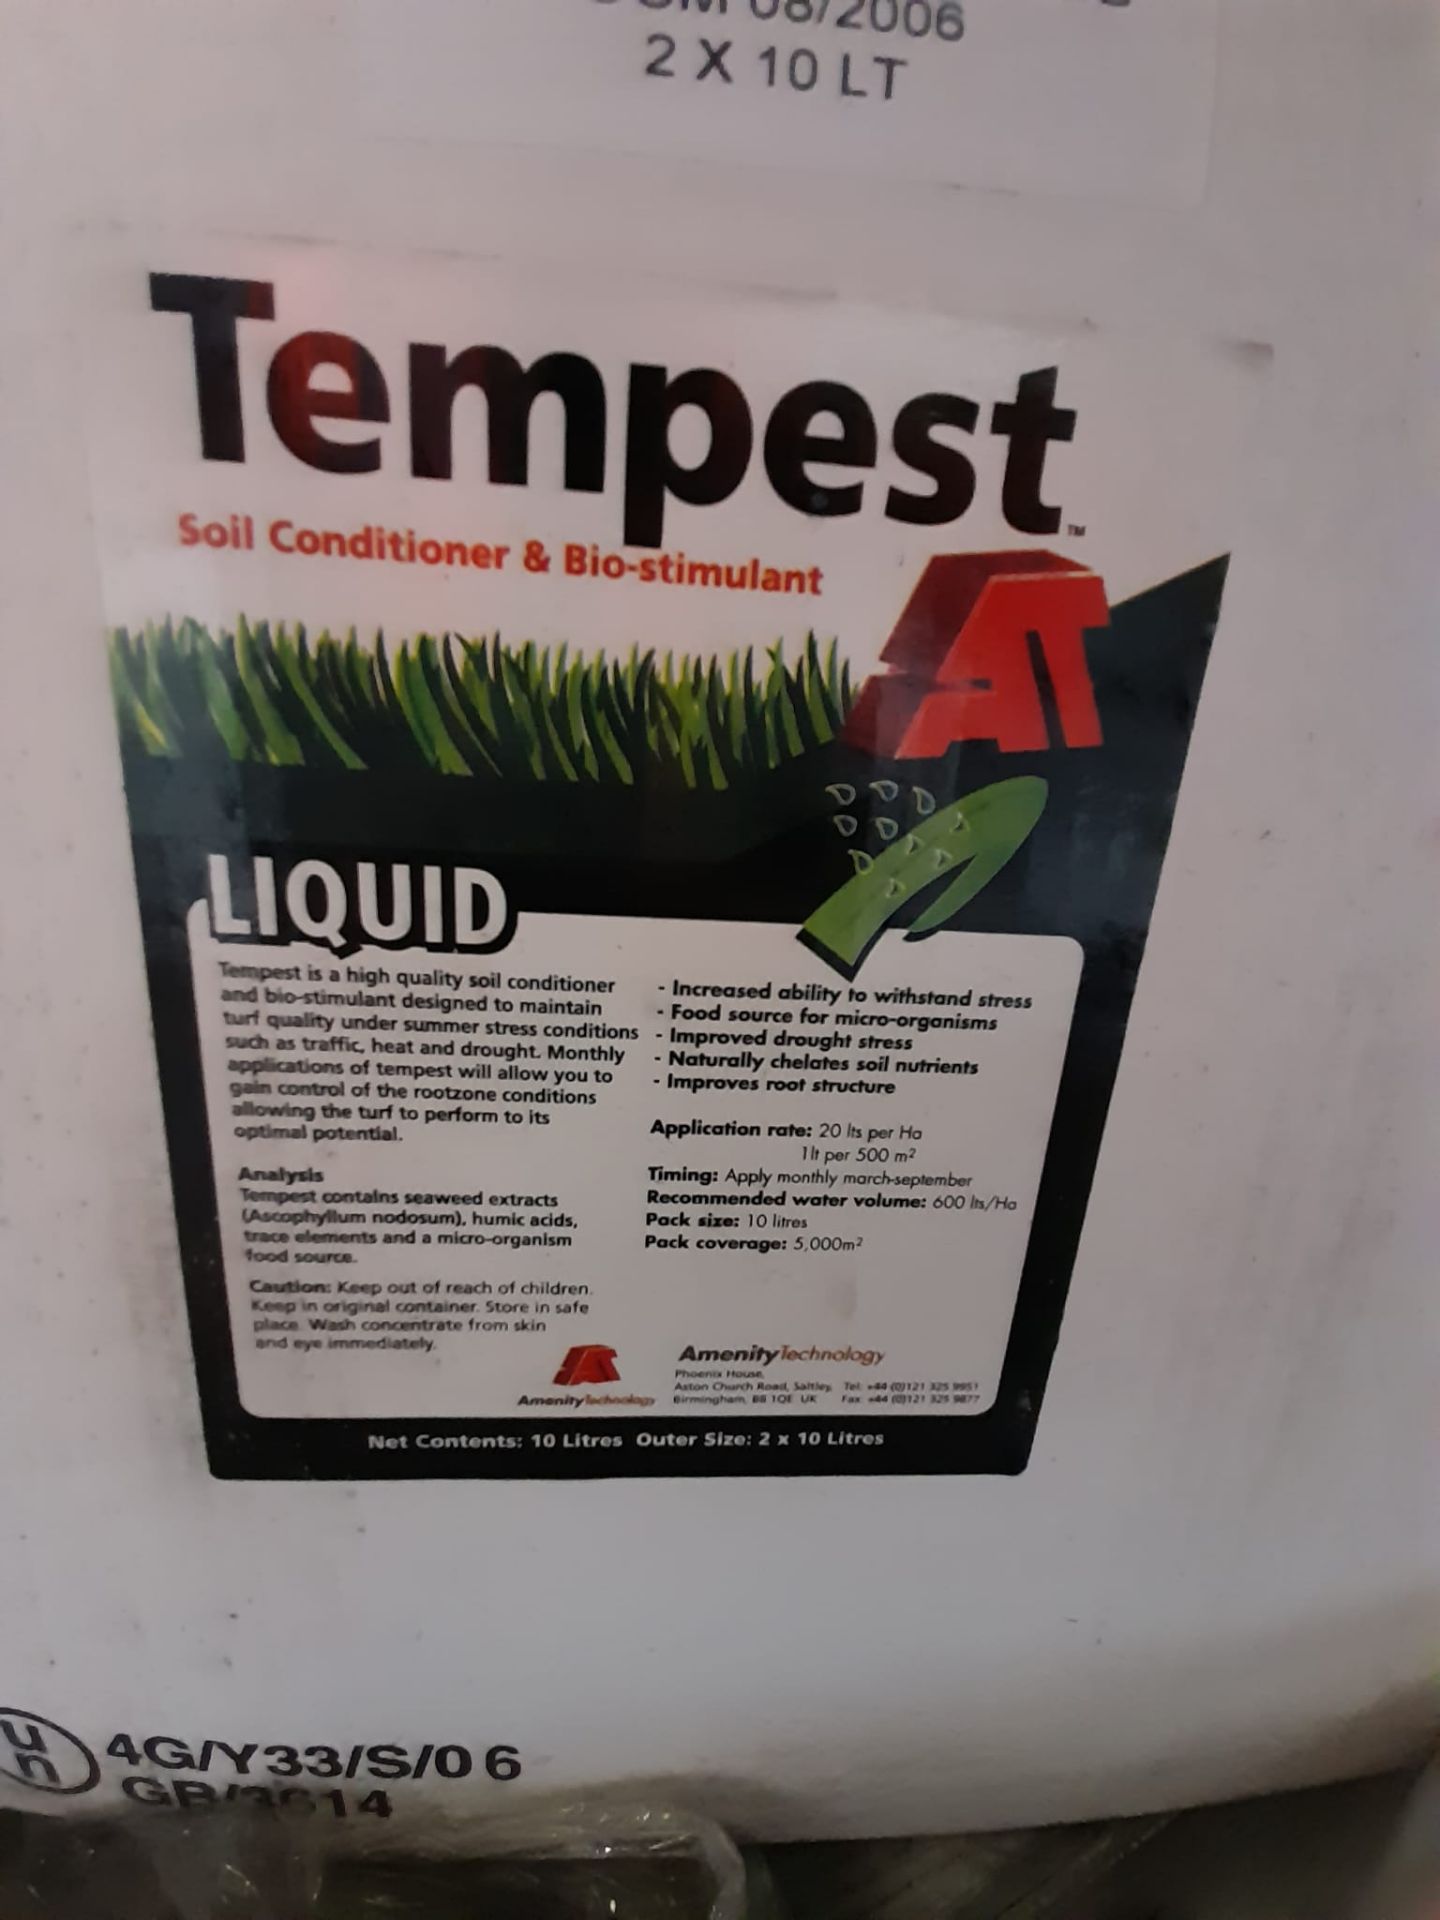 Pallet Approximately 30 Tubs Tempest Soil Conditioner And Bio-Stimulant Deactivator - Image 2 of 3